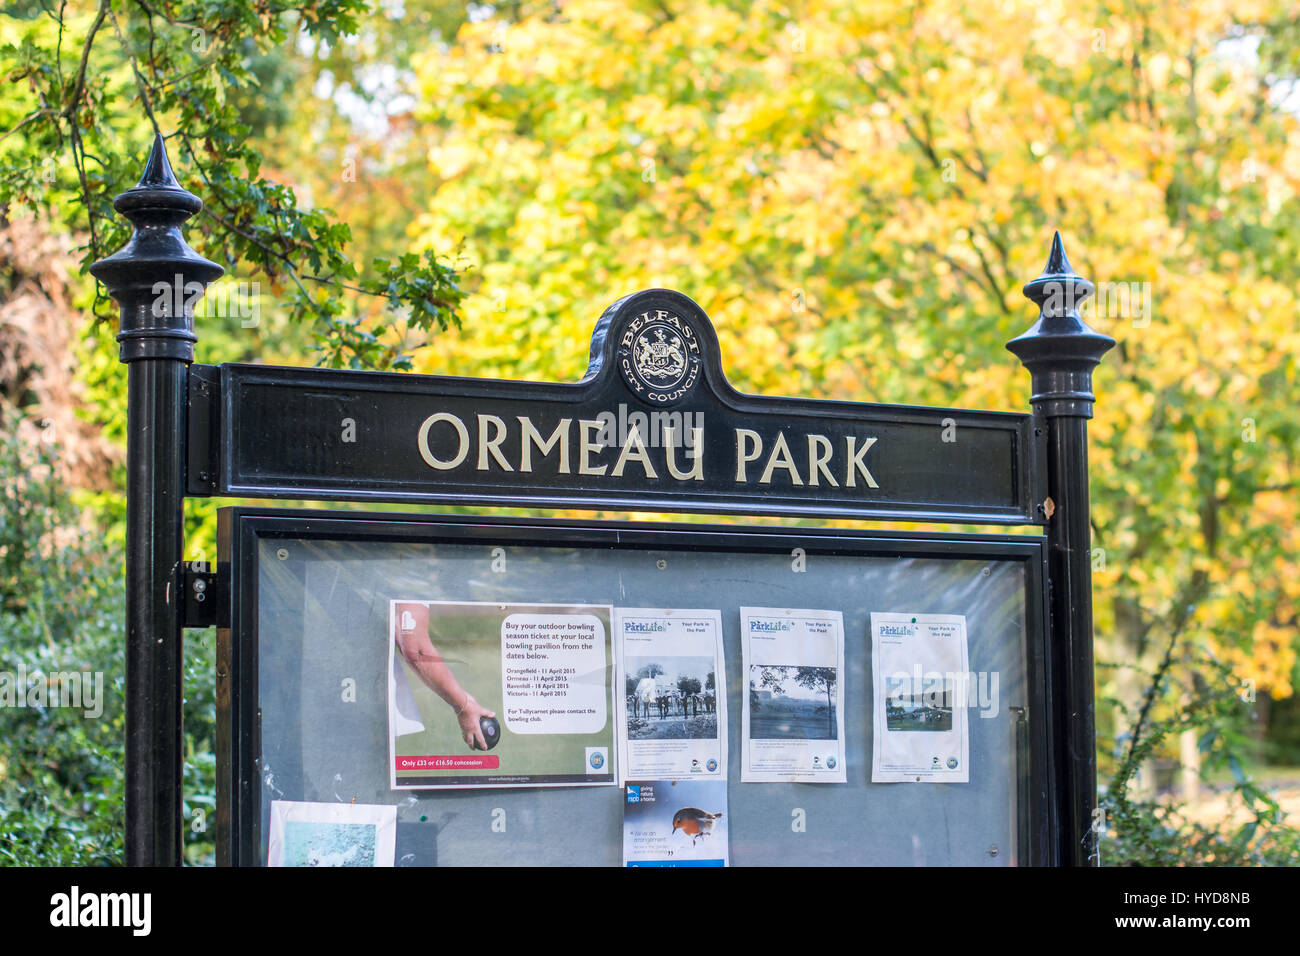 Ormeau Park information sign and notice board. Stock Photo